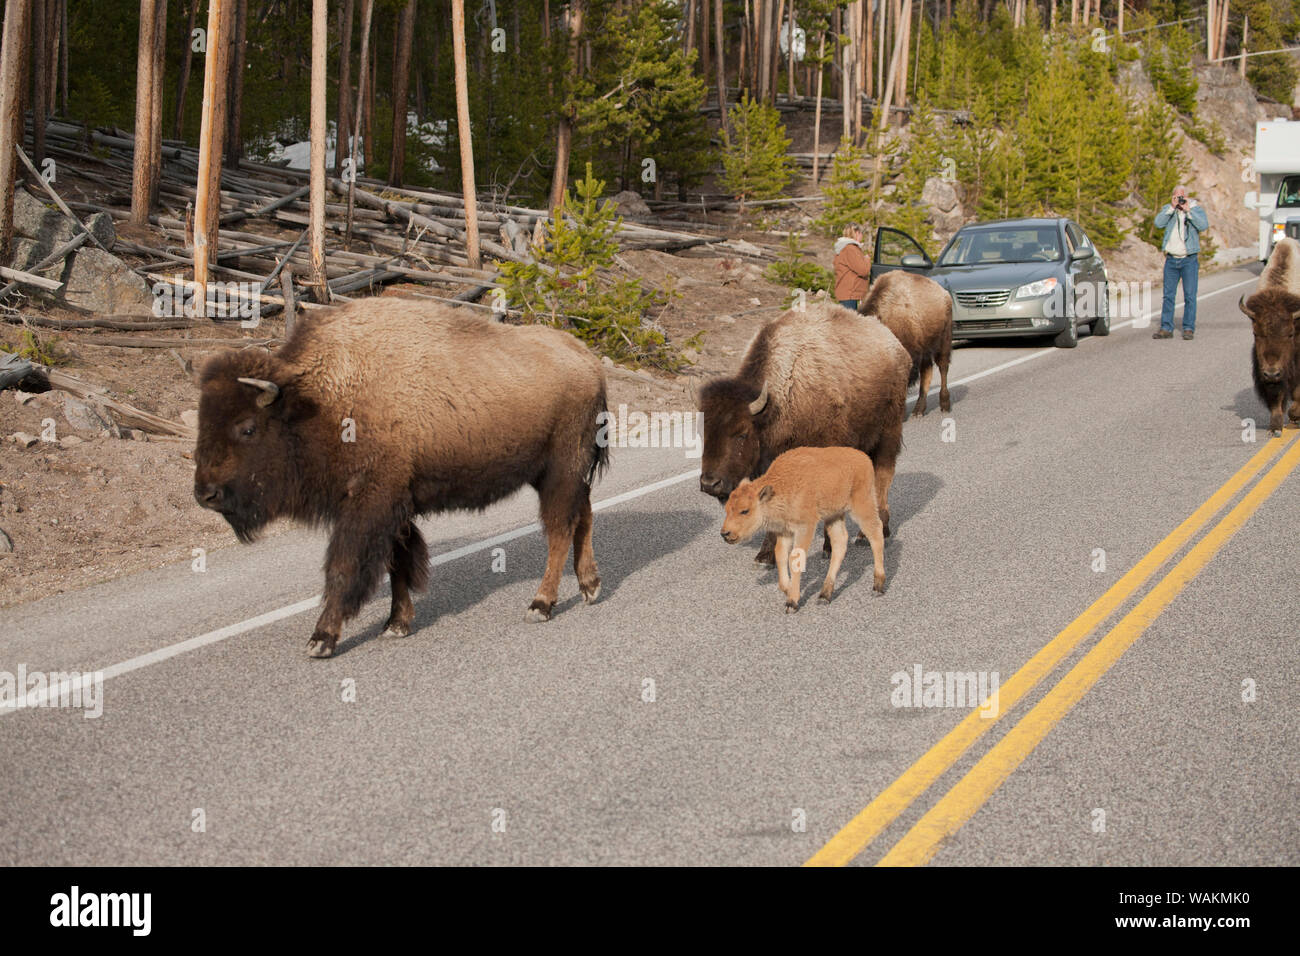 Yellowstone National Park, Wyoming, USA. Bison walking down the middle of the road, next to people and cars. (Editorial use only) Stock Photo